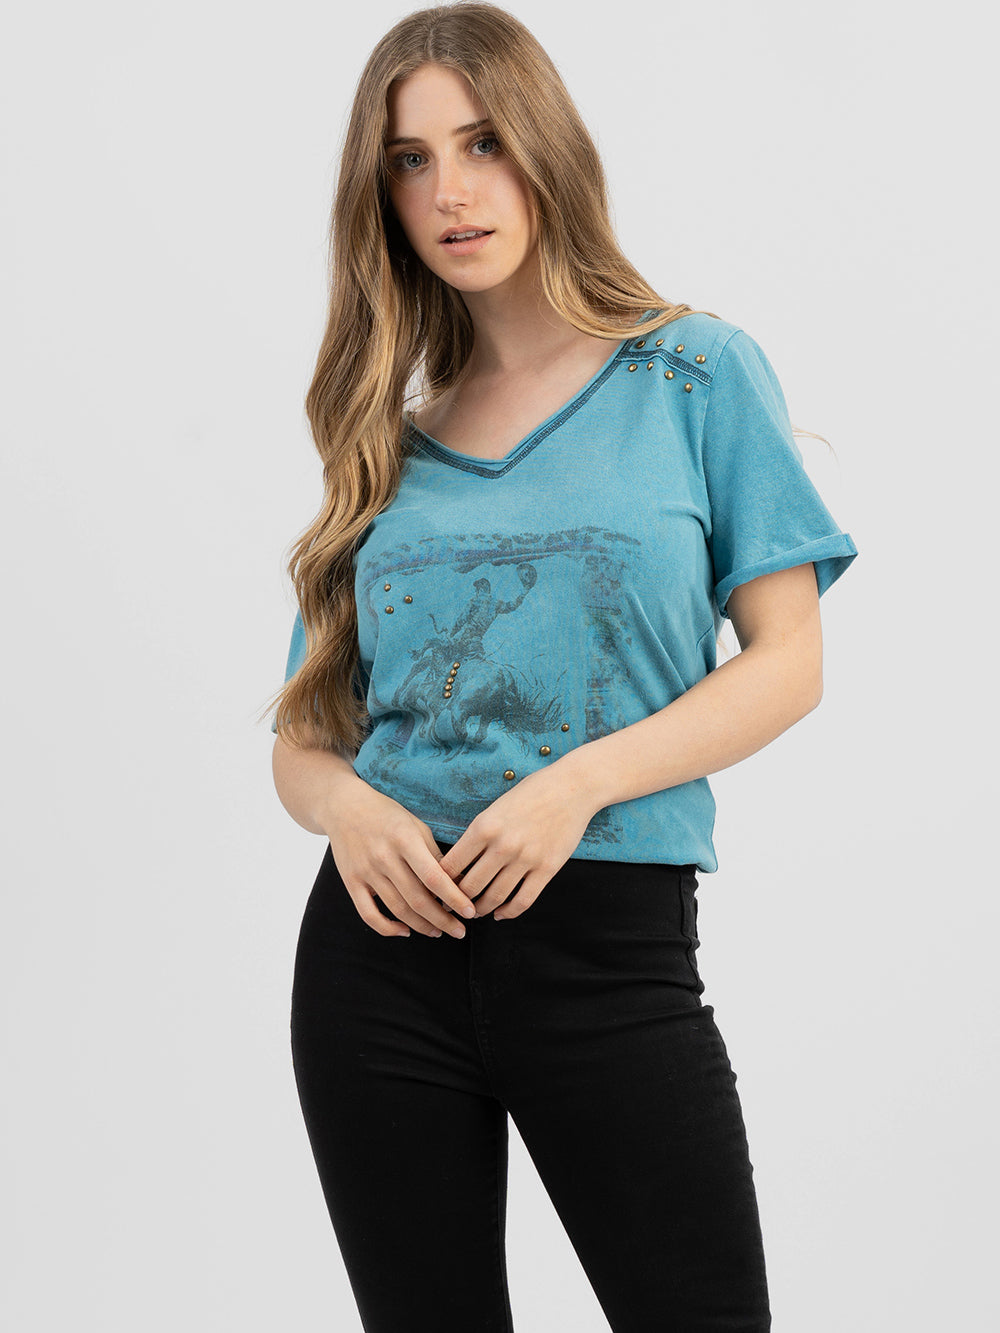 Women's Mineral Wash Studded “Rodeo Horse” Graphic Short Sleeve Tee - Cowgirl Wear